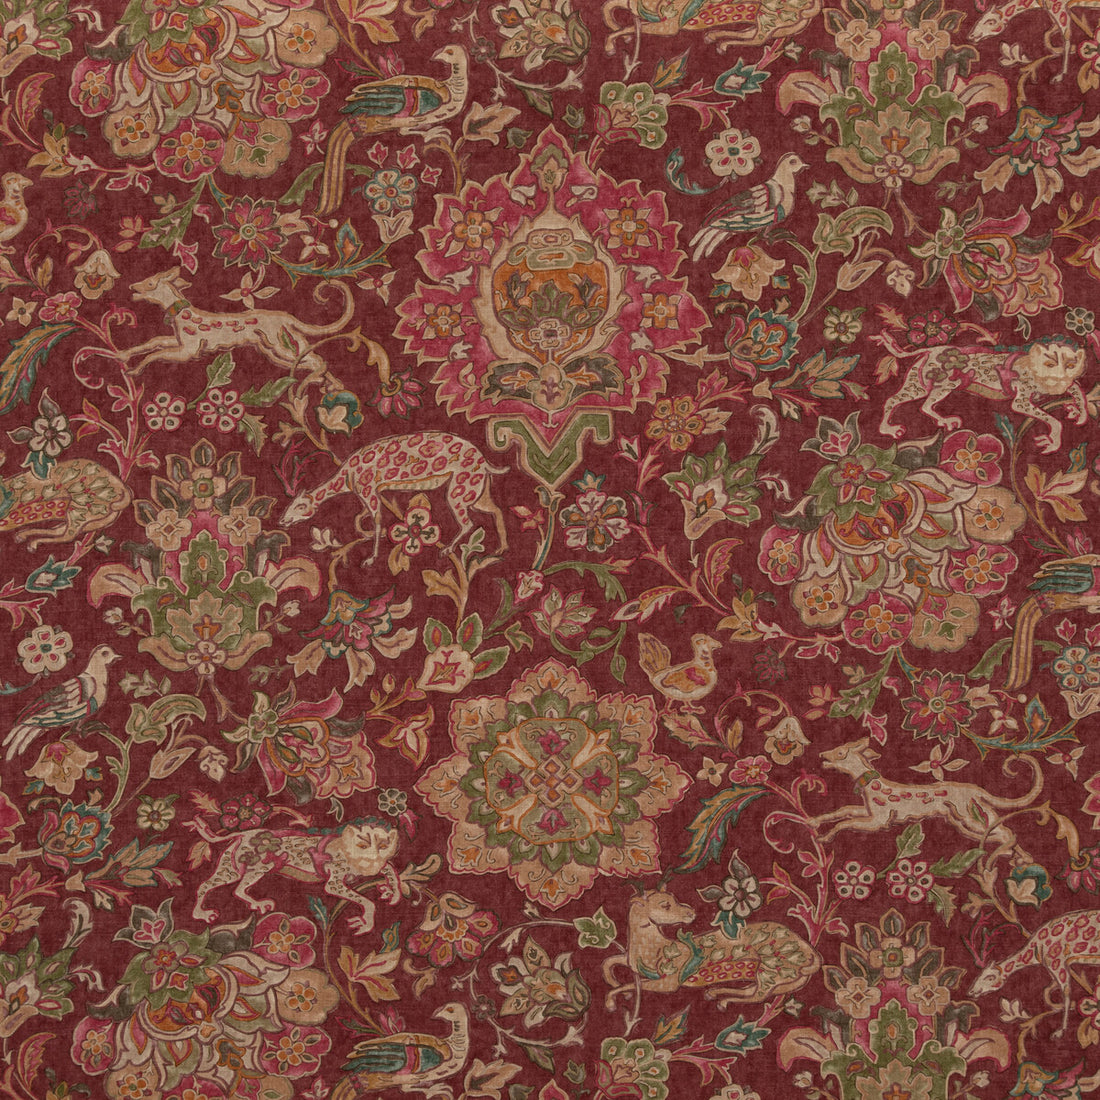 Wild Things fabric in plum color - pattern FD2005.H113.0 - by Mulberry in the Mulberry Long Weekend collection